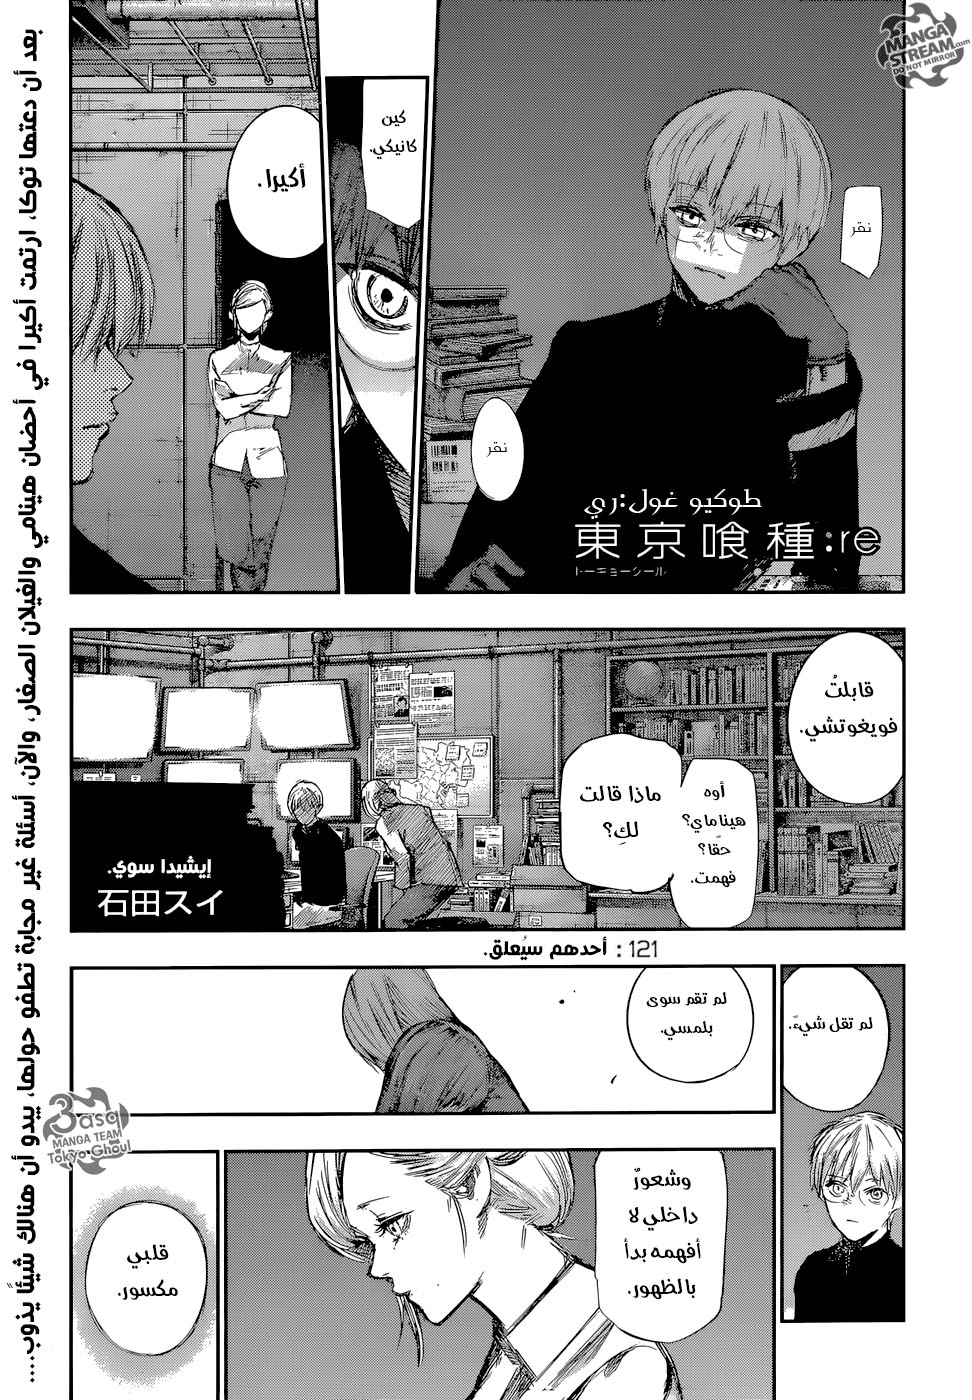 Tokyo Ghoul: Re: Chapter 121 - Page 1